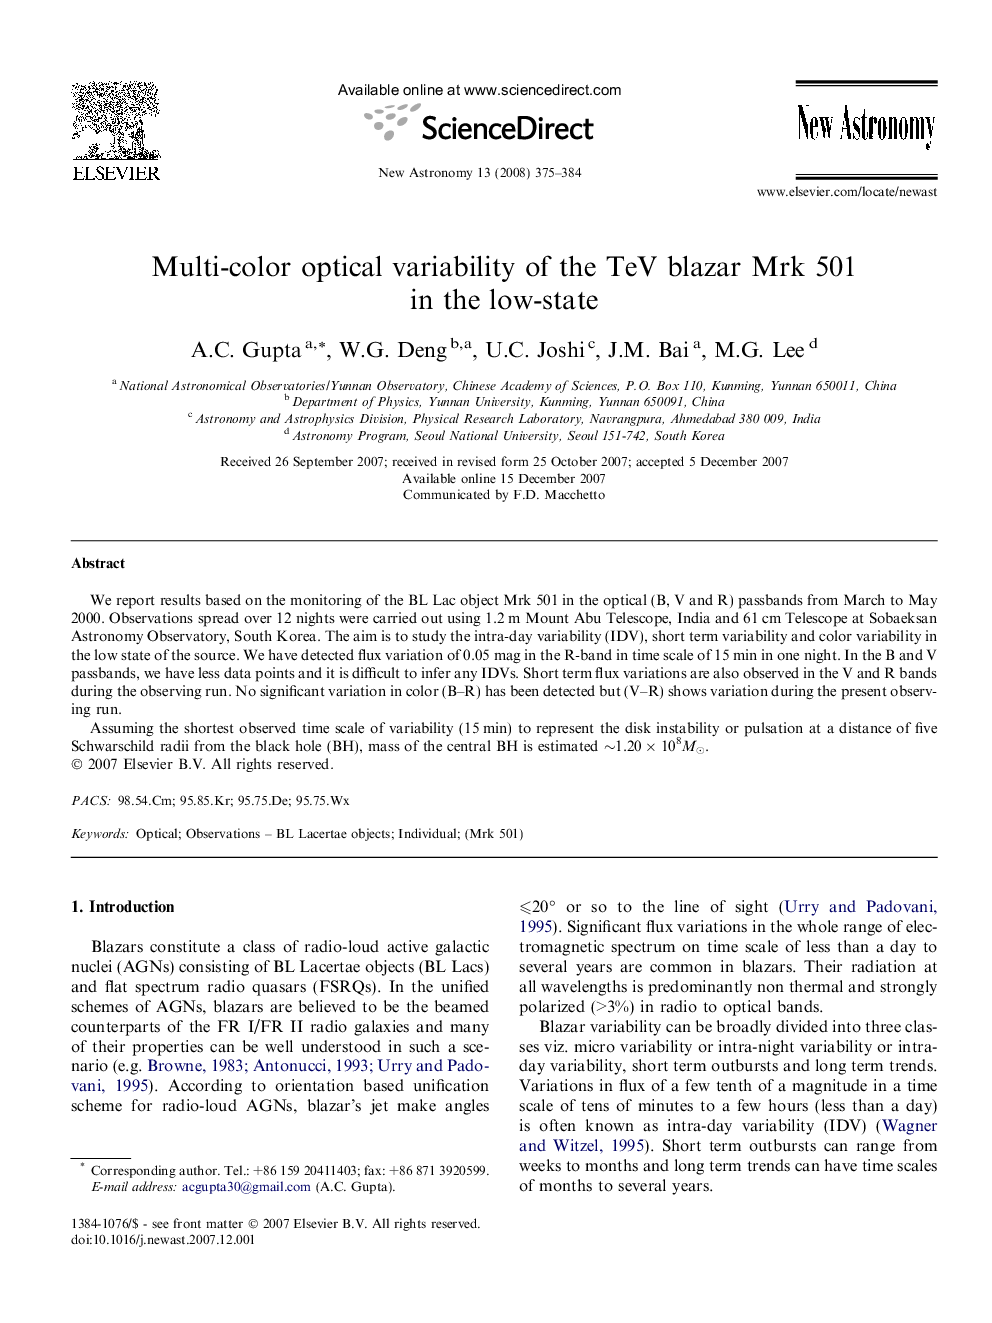 Multi-color optical variability of the TeV blazar Mrk 501 in the low-state